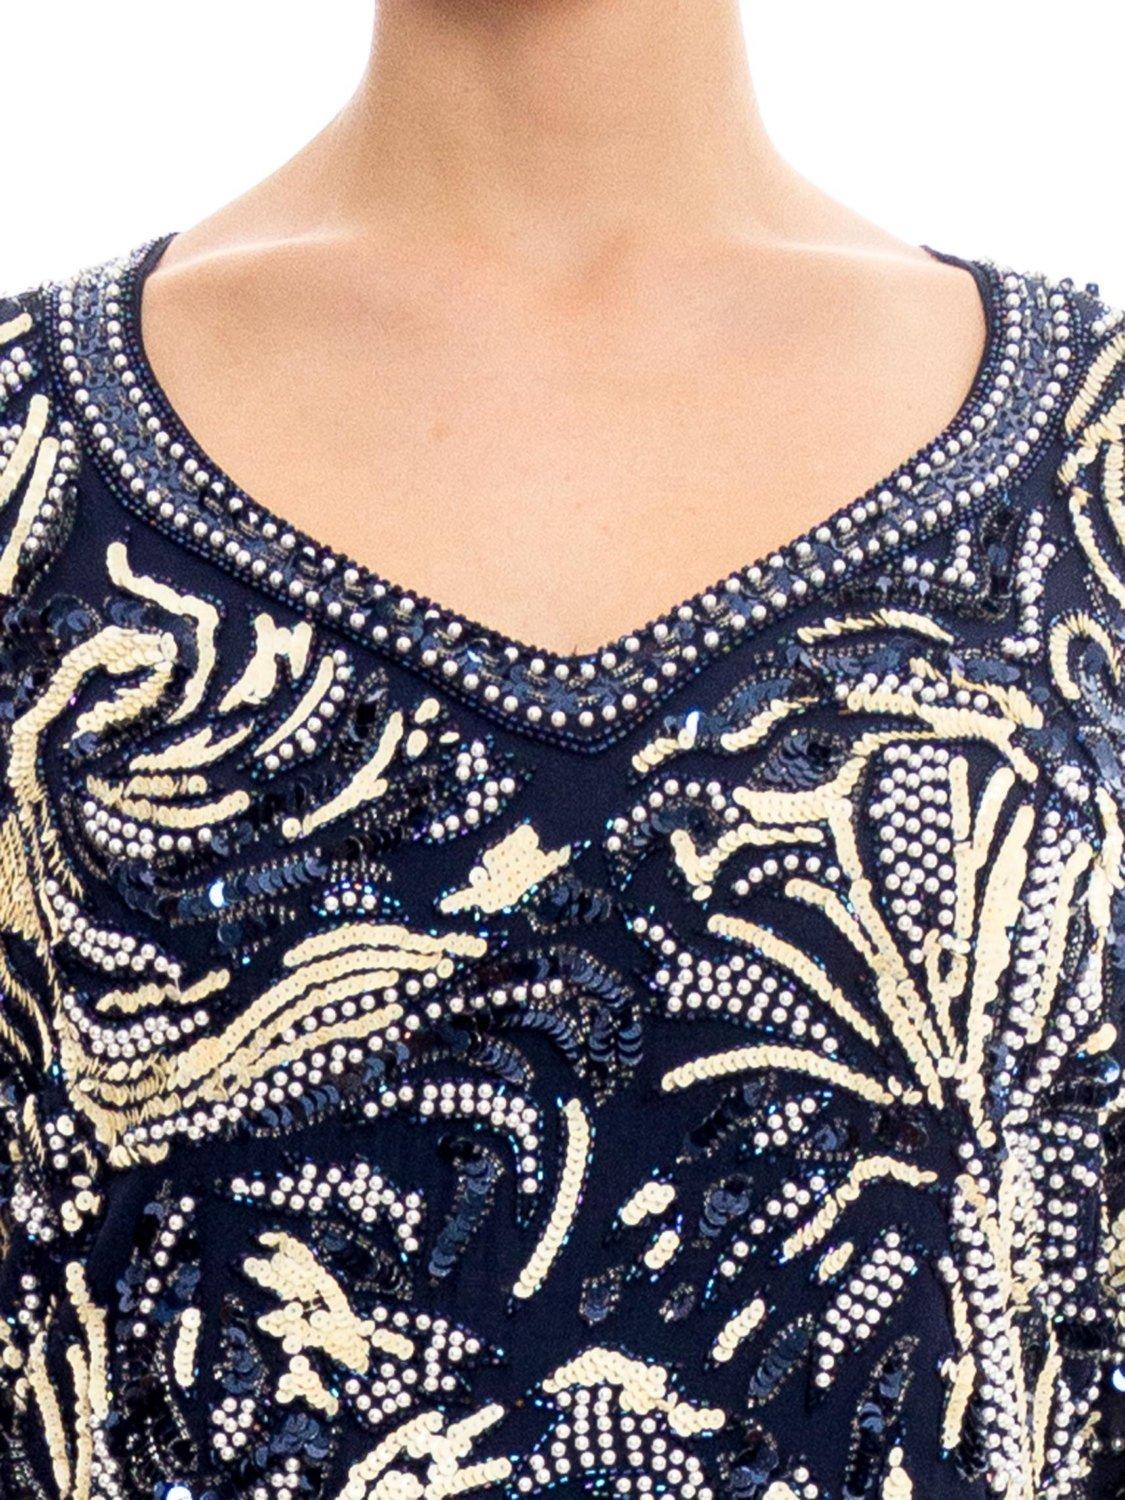 Black 1980'S Navy Blue Beaded Silk Chiffon Oversized Long Sleeve Top With Pearls For Sale